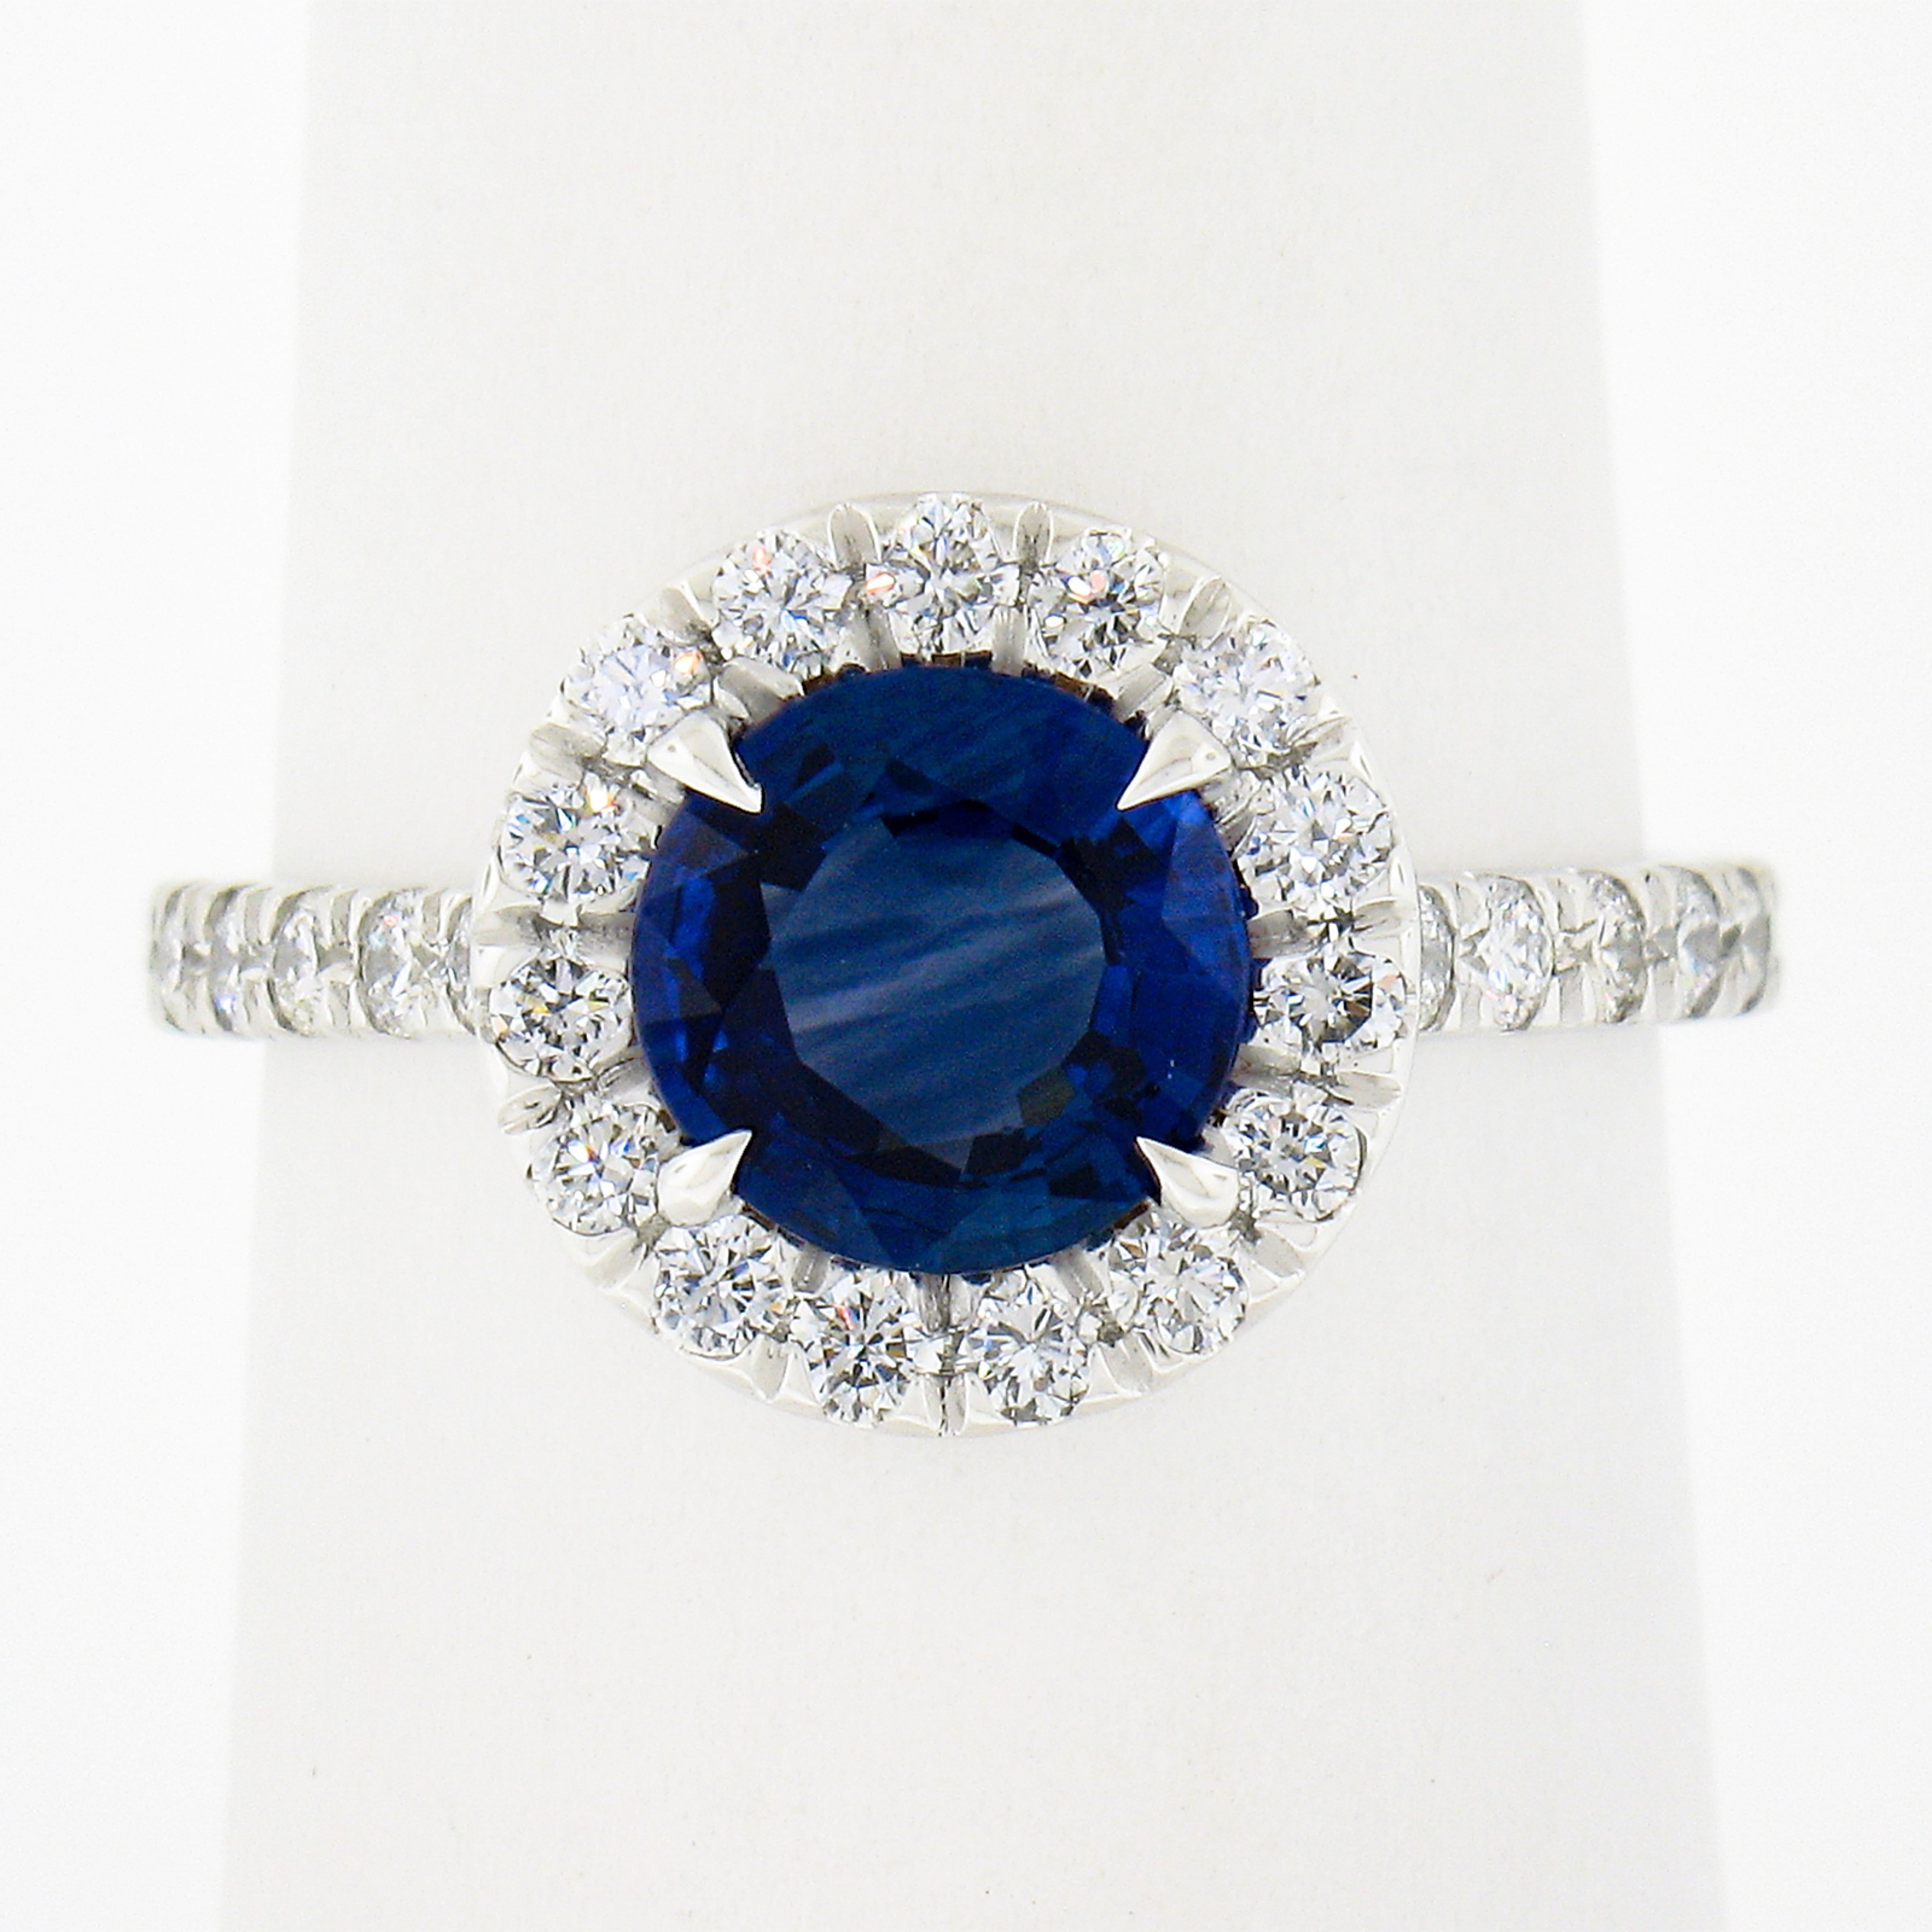 You are looking at a truly magnificent solid platinum sapphire and diamond low profile cocktail or engagement ring. The ring features a round brilliant cut (rare cut for sapphire) sapphire that is elegantly prong set at the center of a brilliant